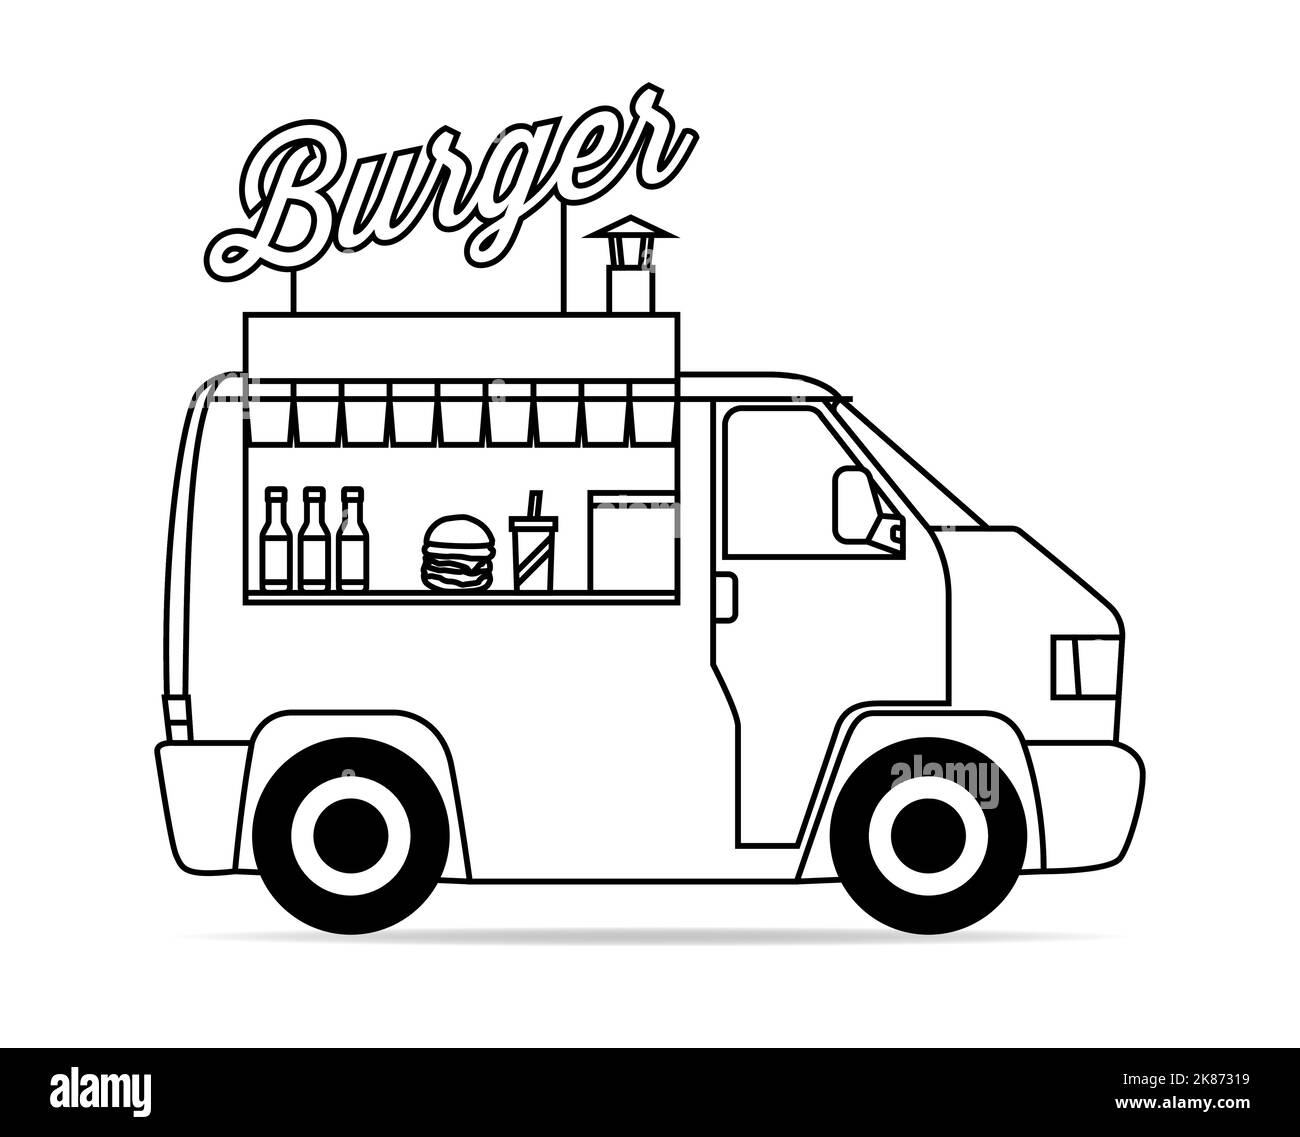 A German bus converted into a food truck Stock Vector